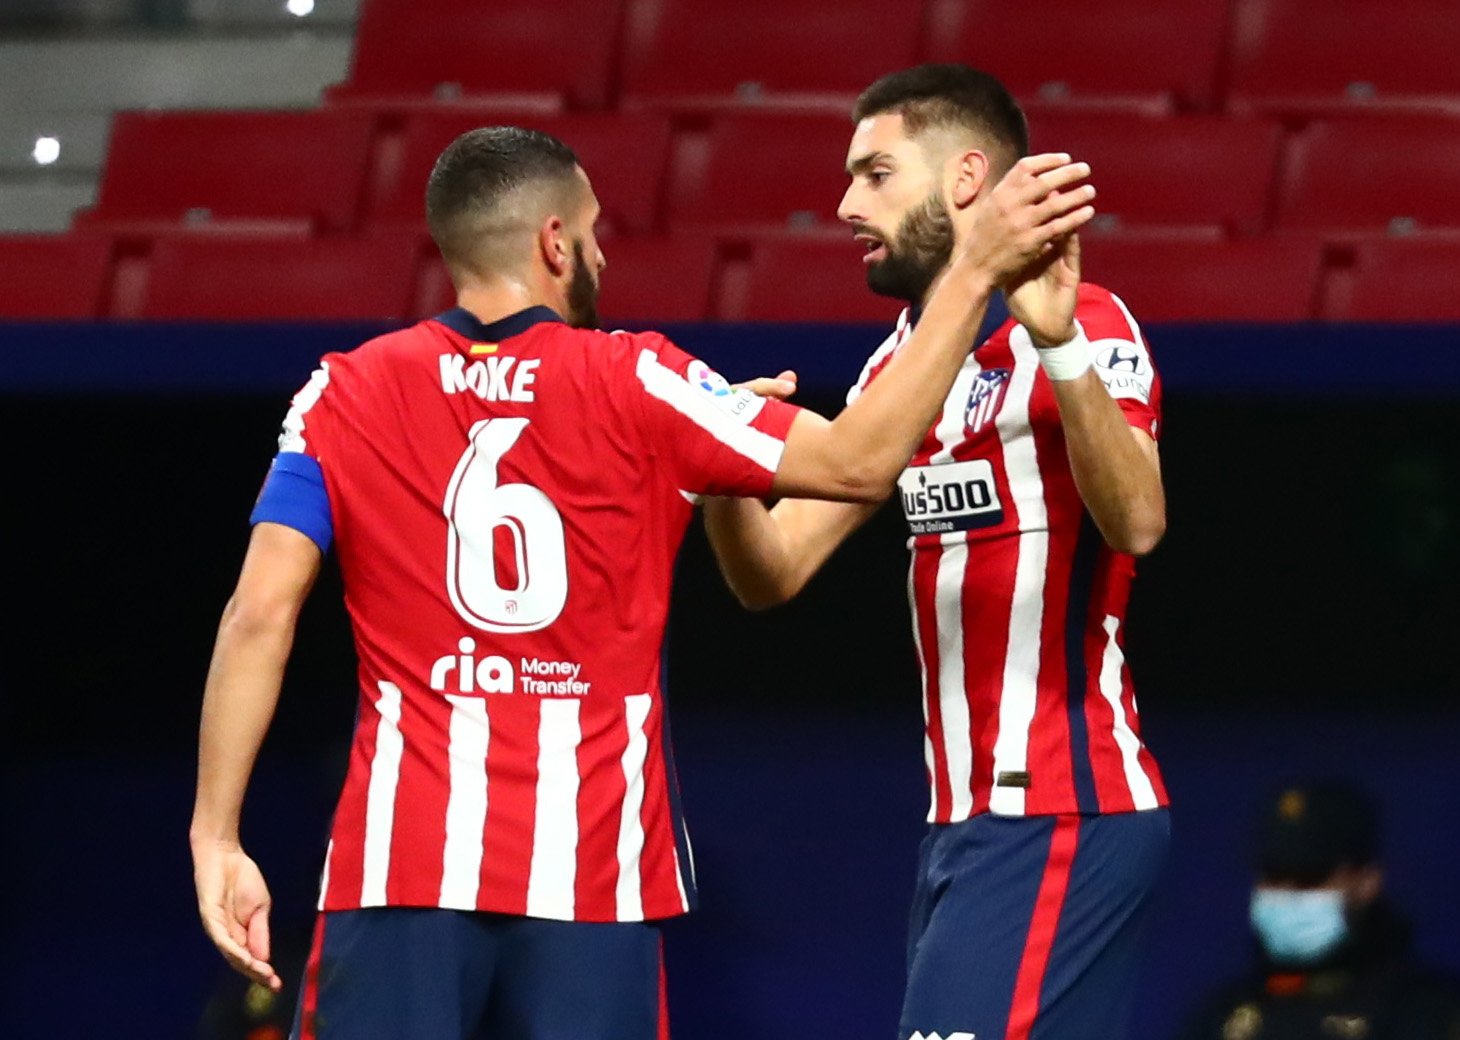 Yannick Carrasco: “We’re thinking game by game”